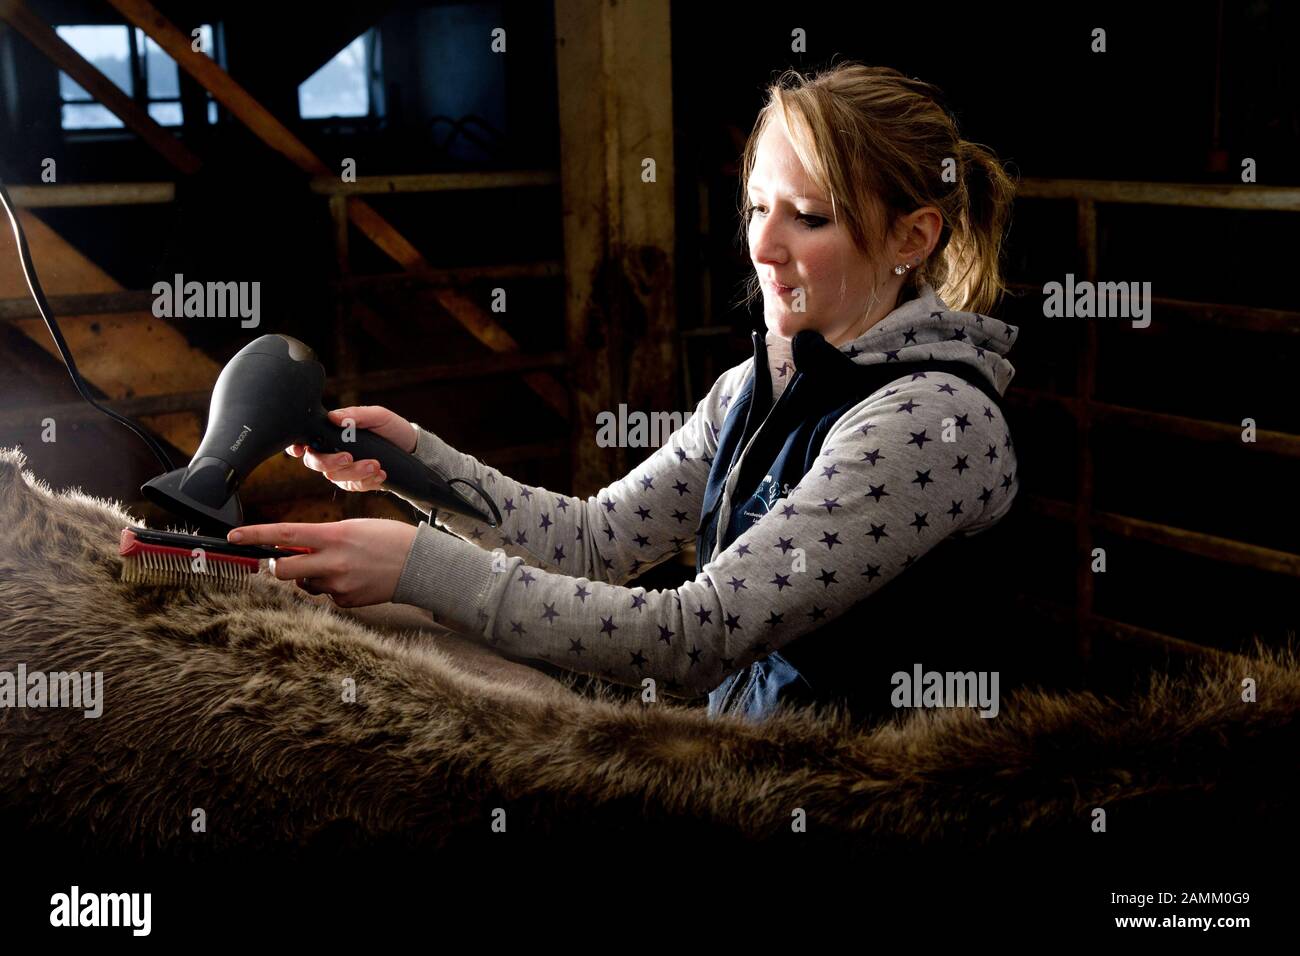 Cow-fitter and young farmer Nicole Nägele styles a cow from her home barn in Seeg in Ostallgäu for an animal show. In the picture she is blow-drying and combing the topline. [automated translation] Stock Photo